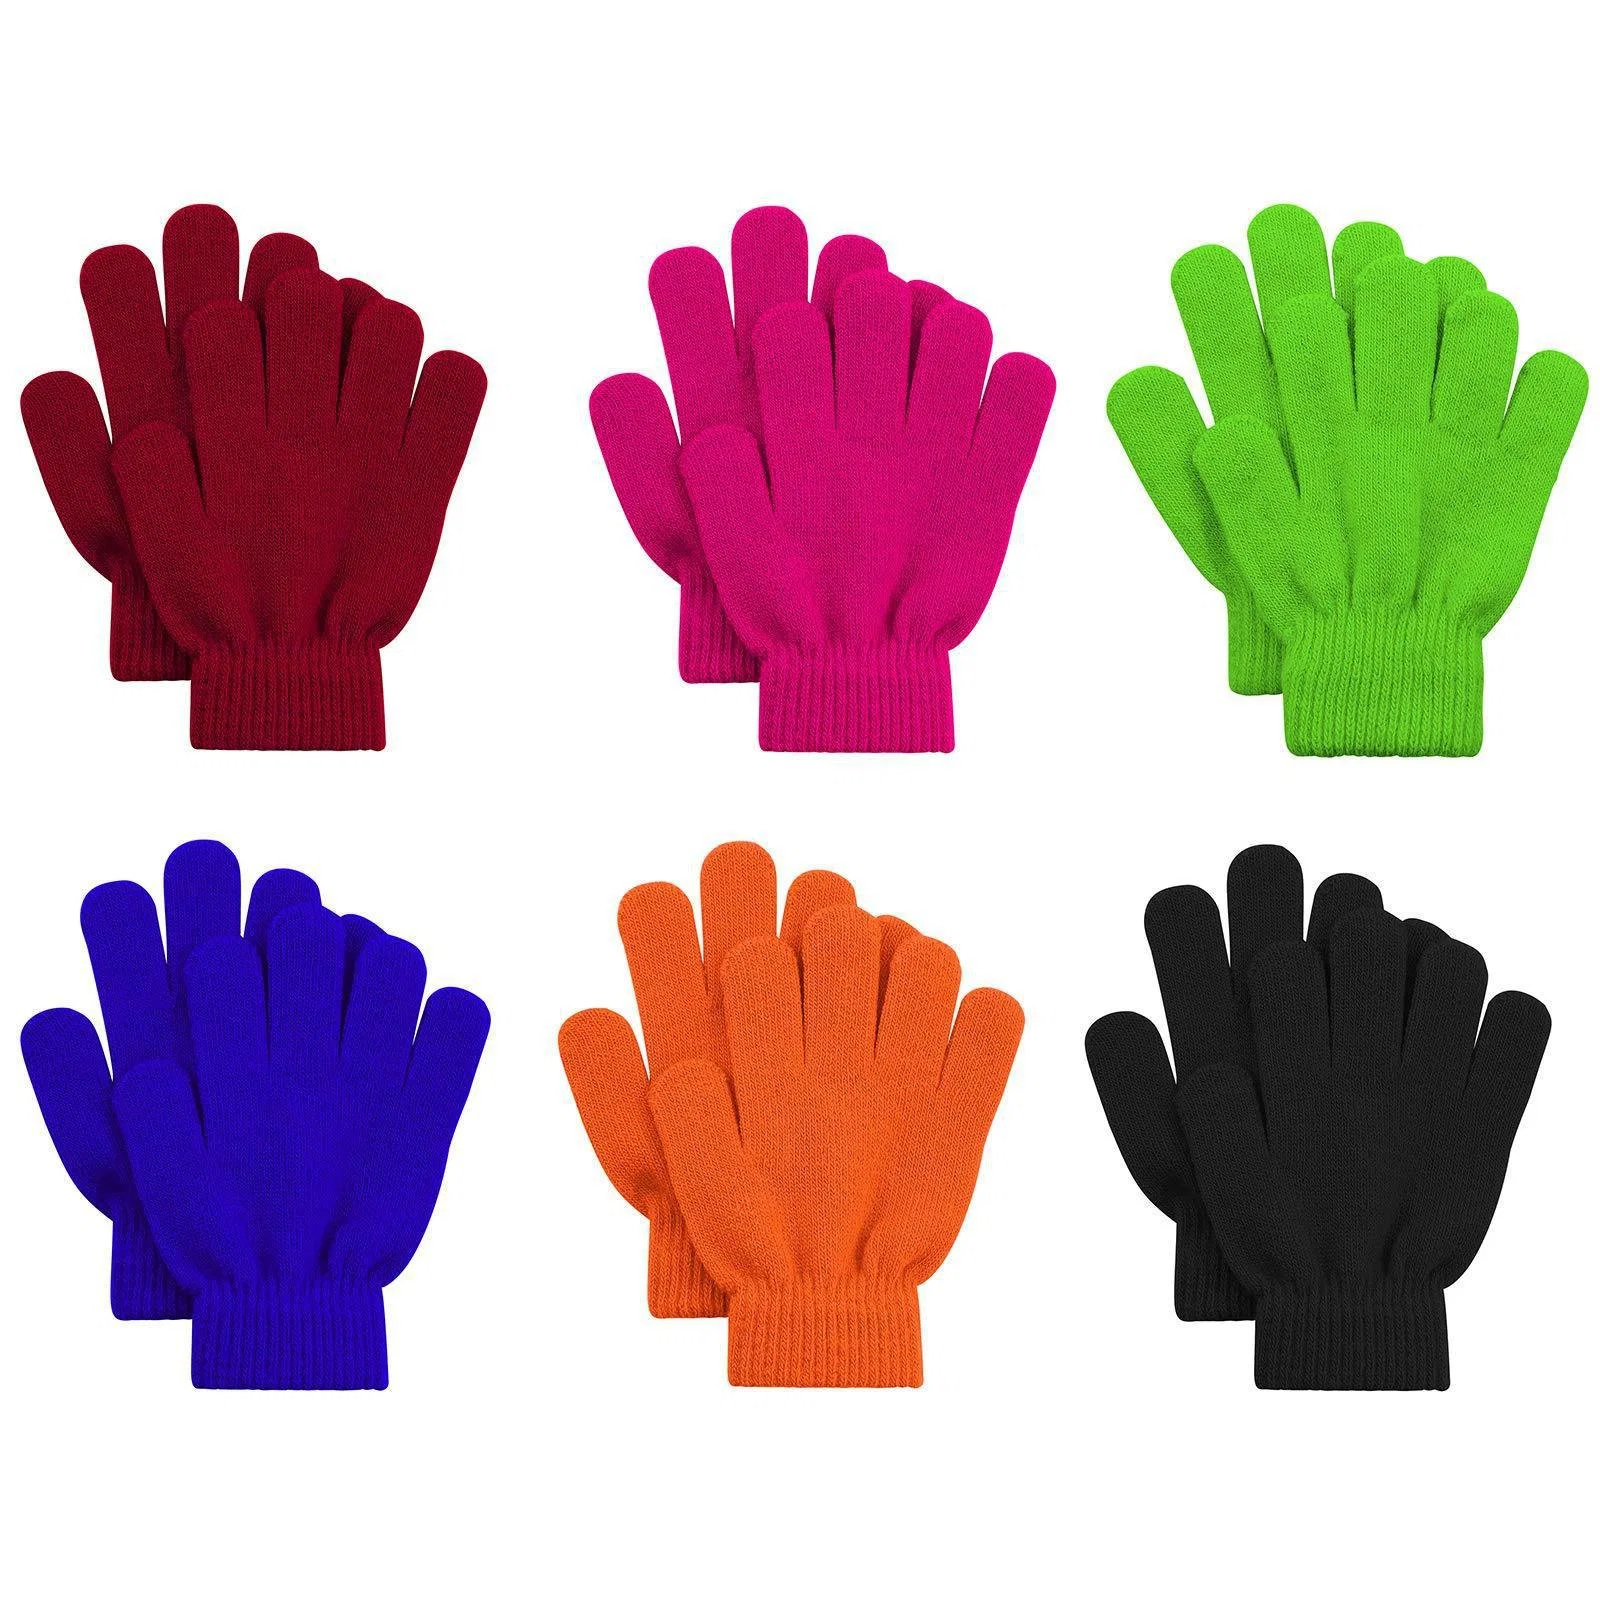 Comfortable Cotton Polyester/Cotton Winter Magic Gloves Colorful Gloves